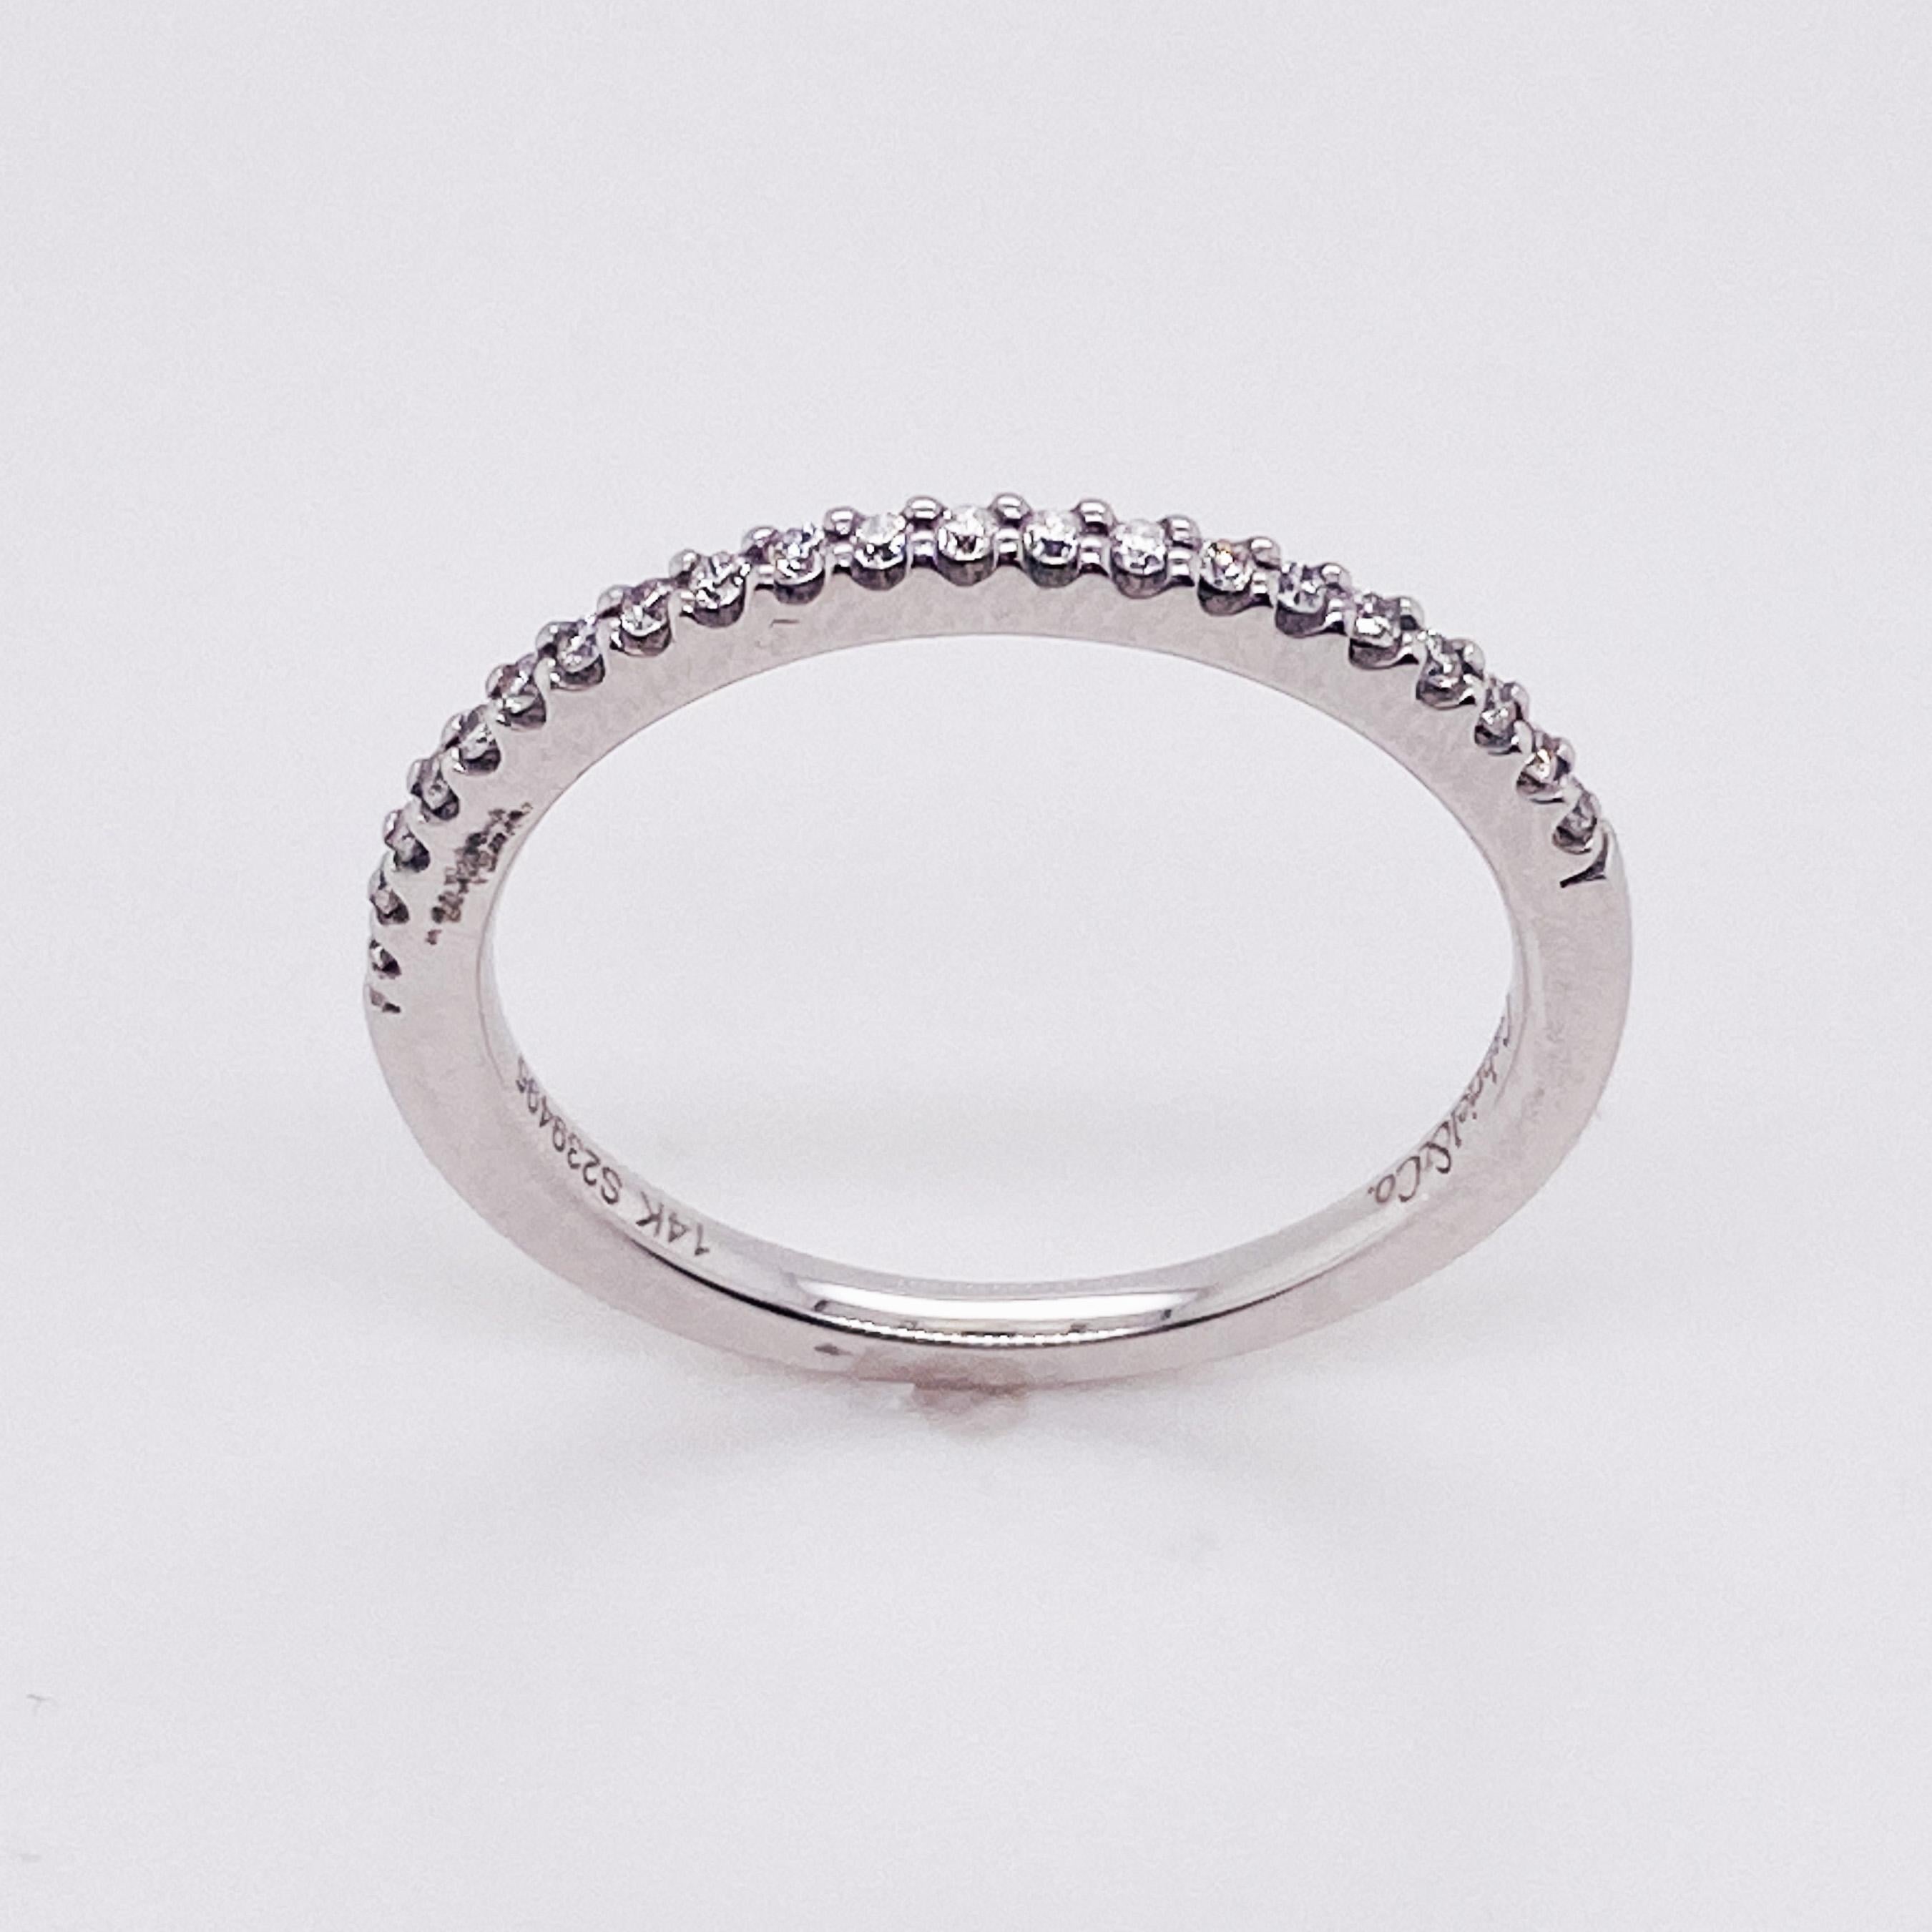 For Sale:  Diamond Half Eternity Band in 14k White Gold .13 Carat Round Diamond Stackable 2